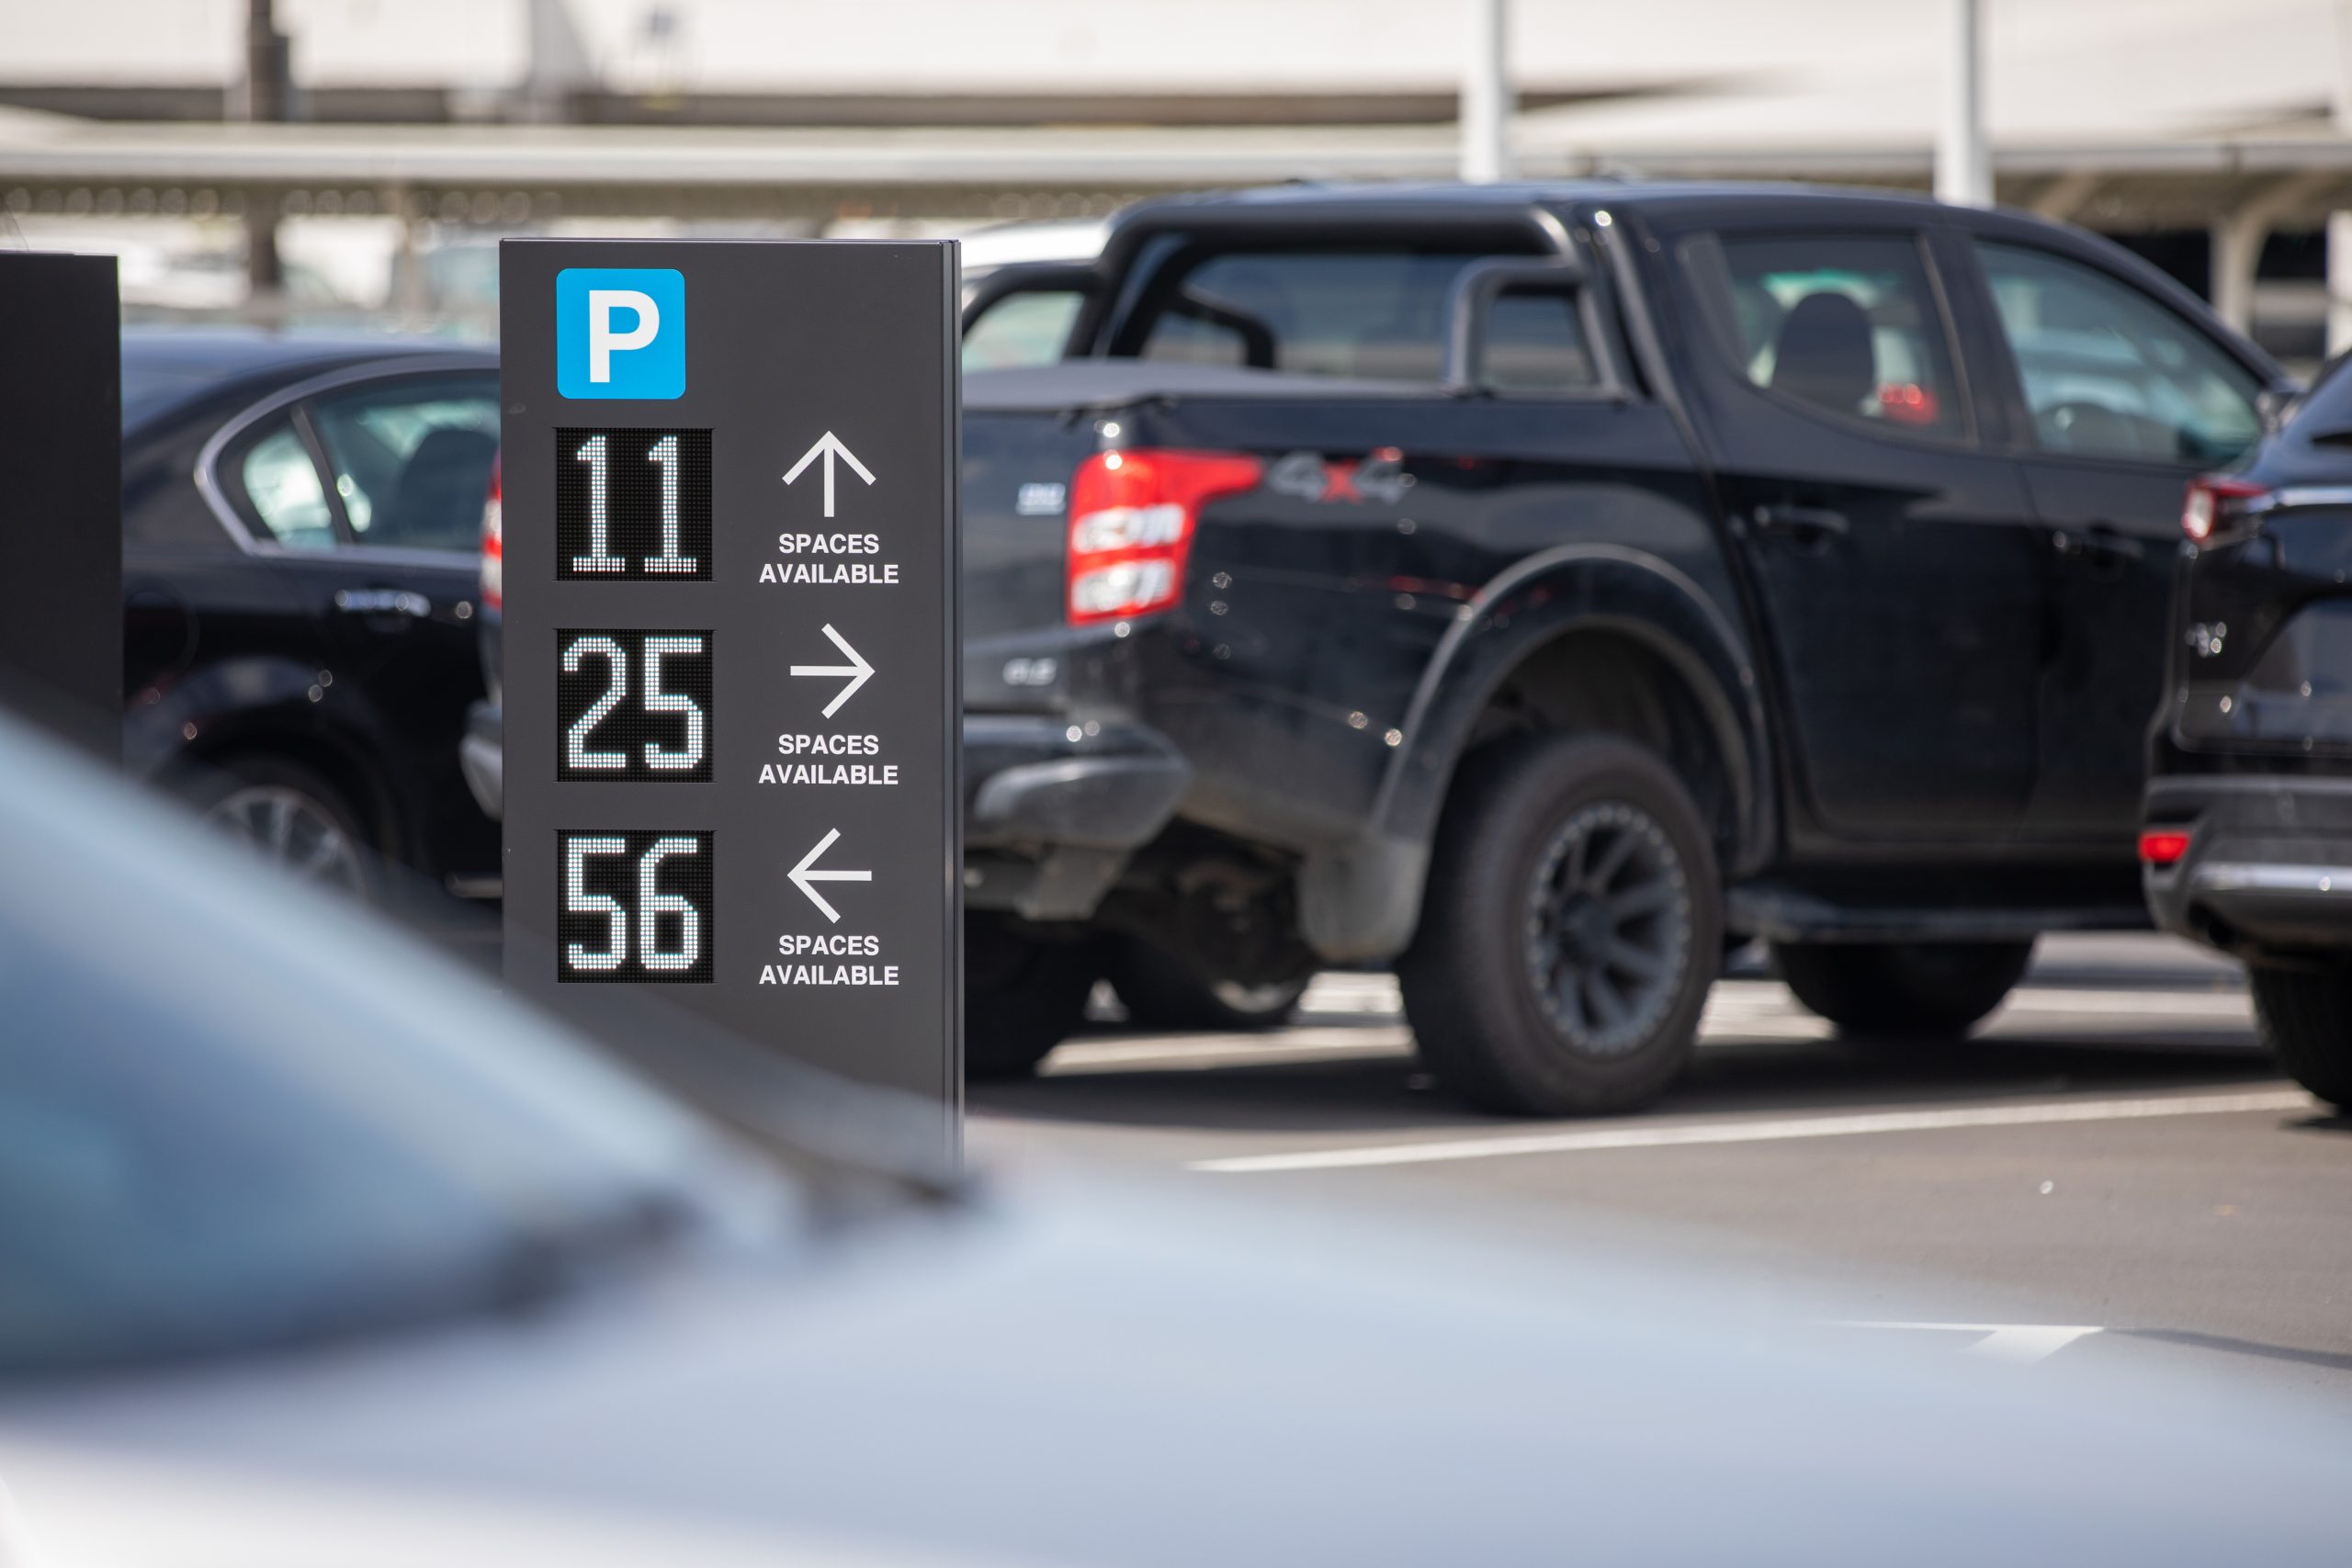 Parking Equipment installed at Auckland Airport